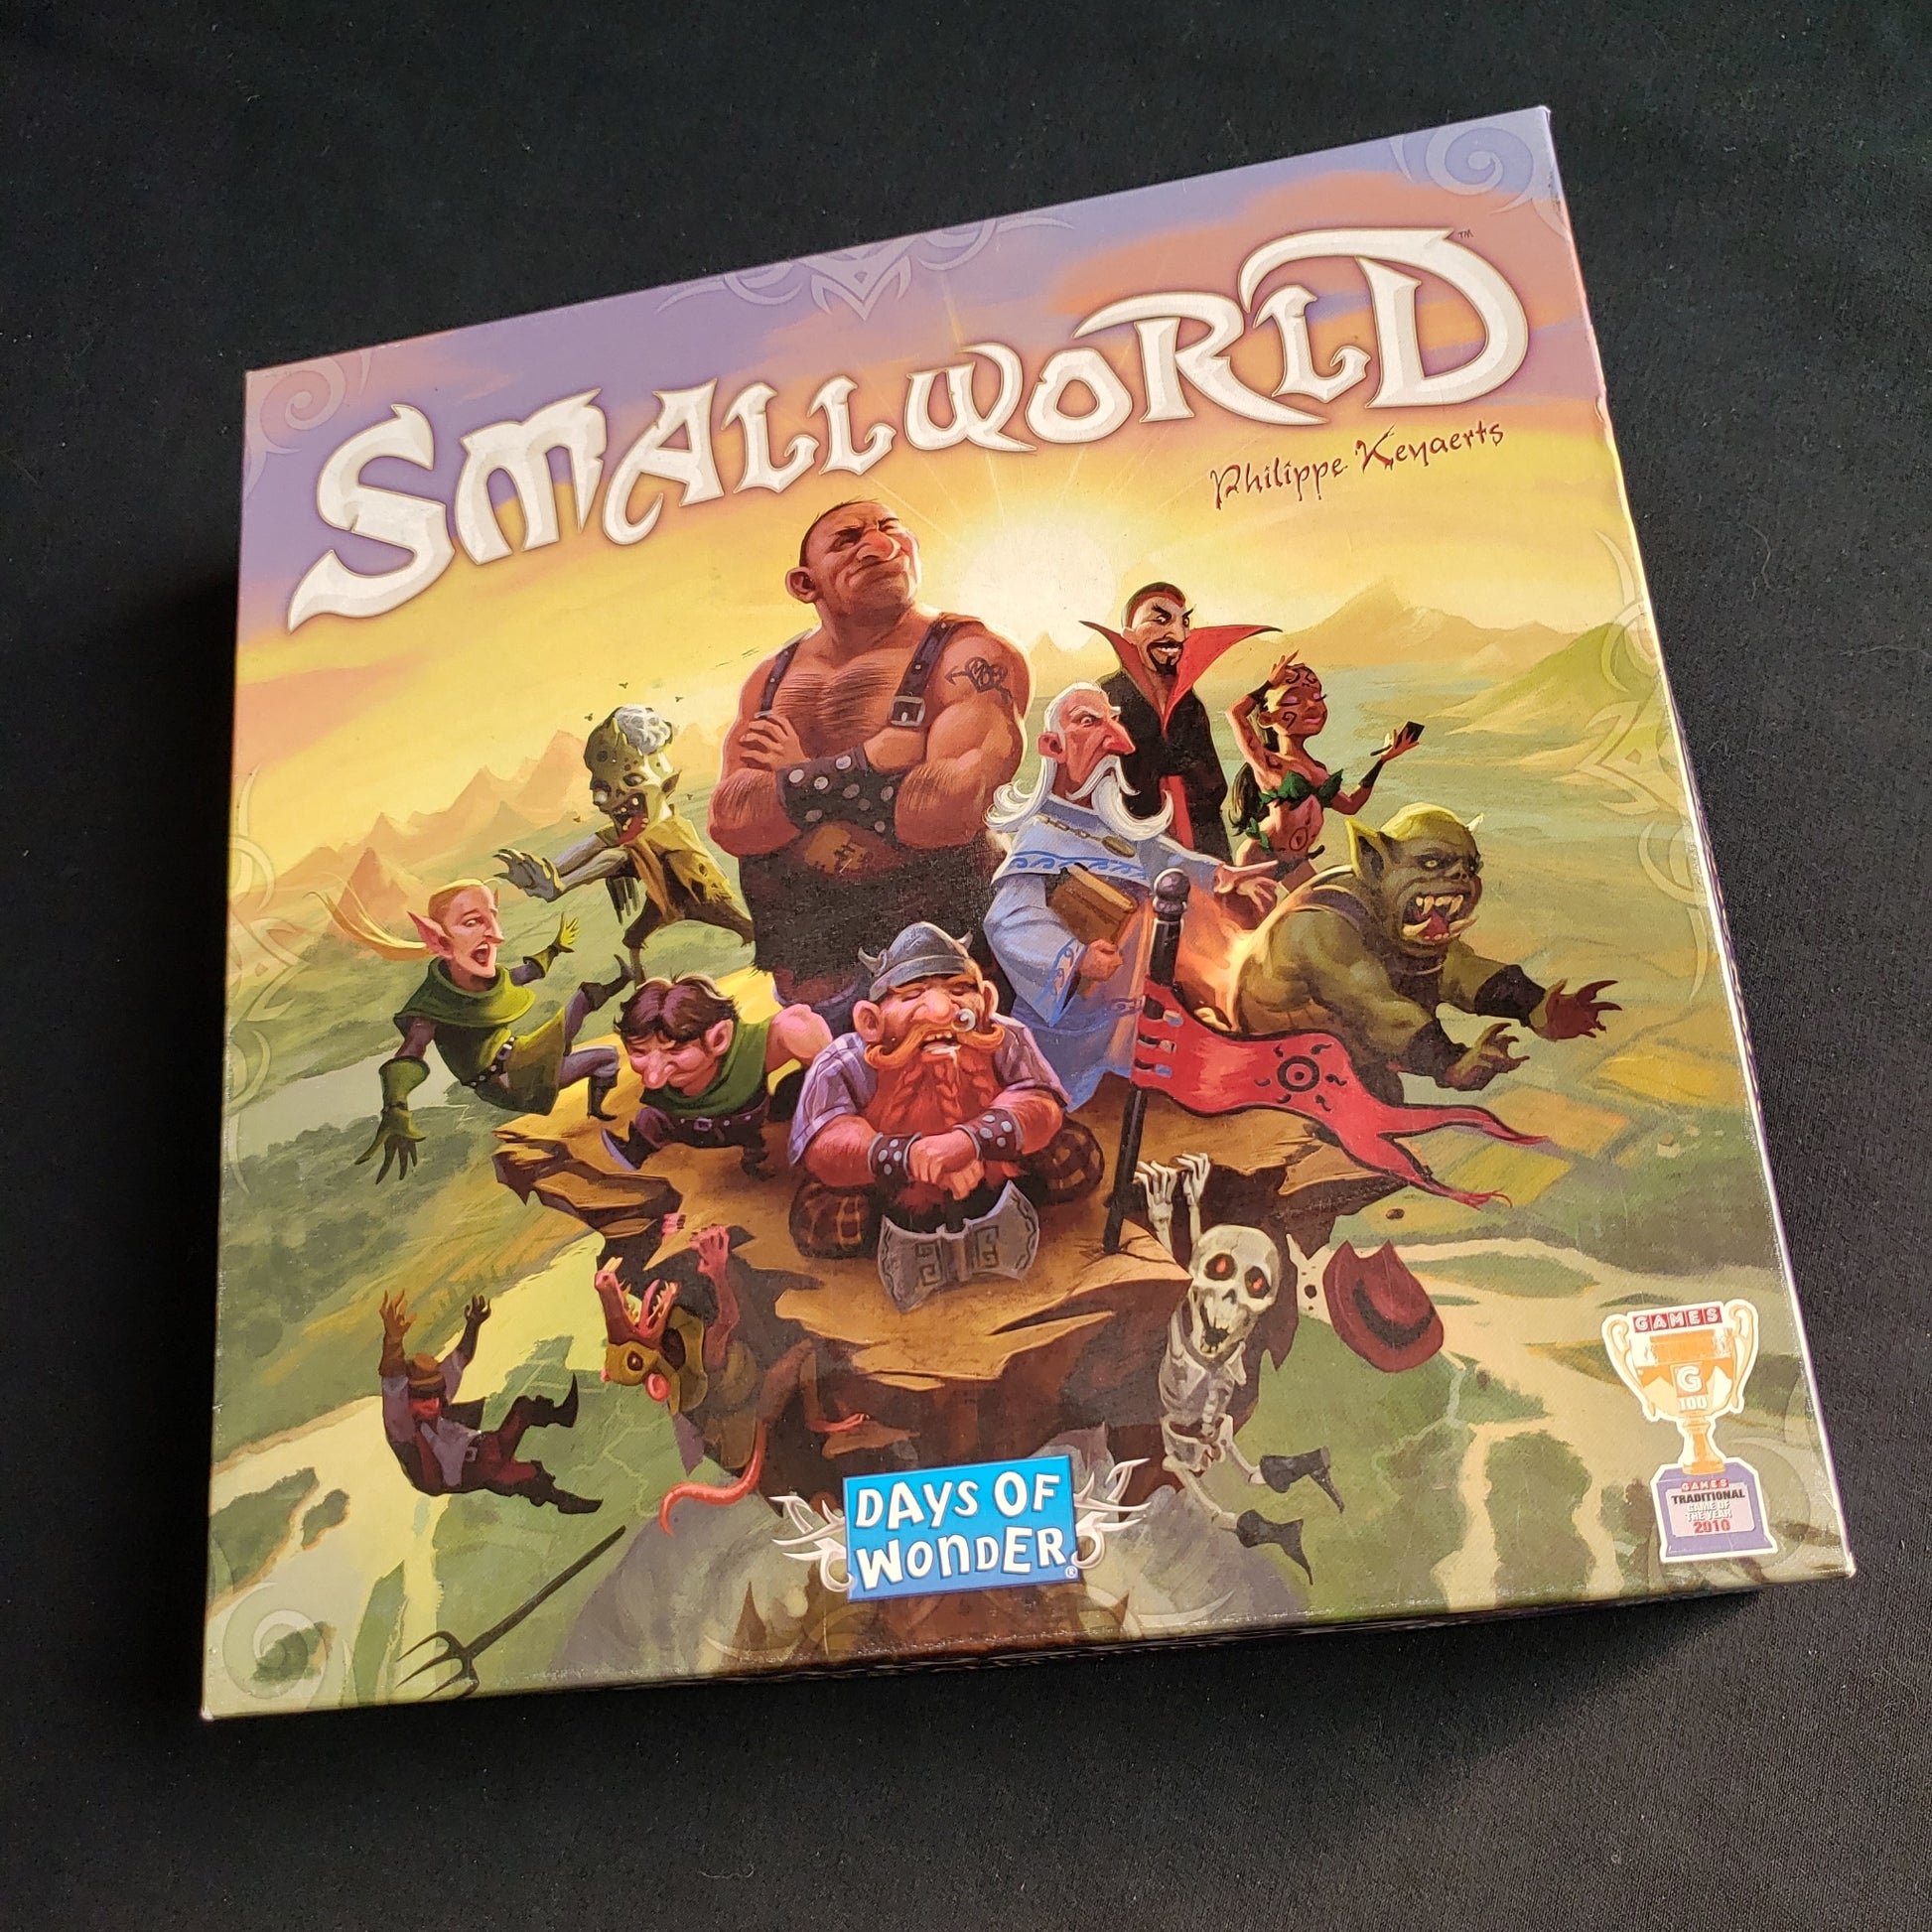 Image shows the front cover of the box of the Small World board game